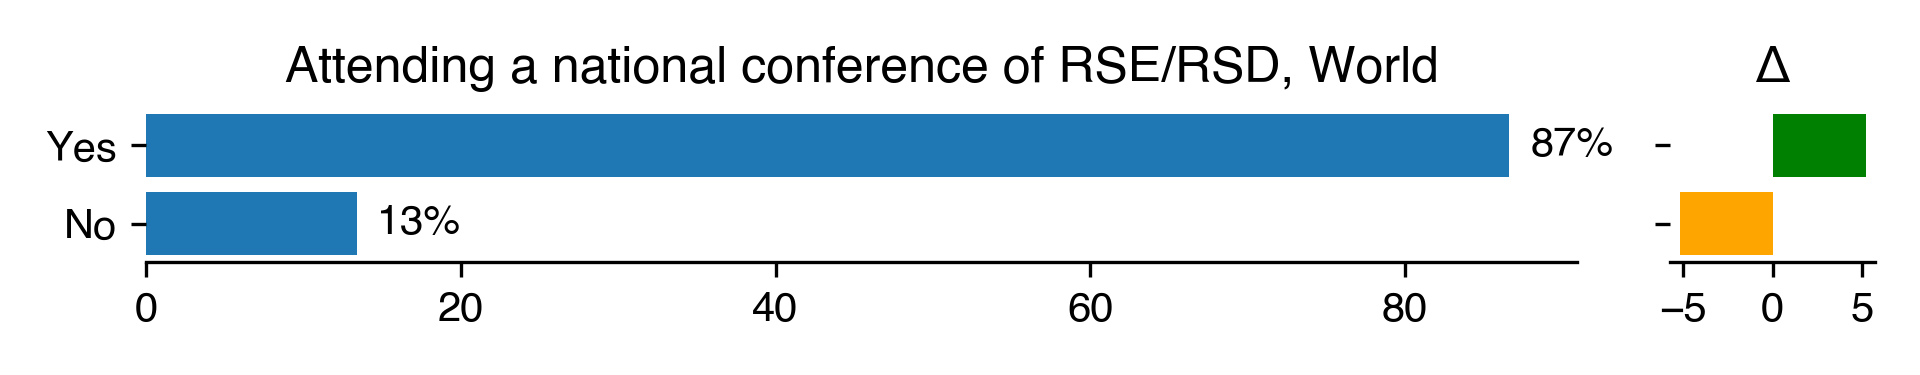 attending-a-national-conference-of-rse-rsd